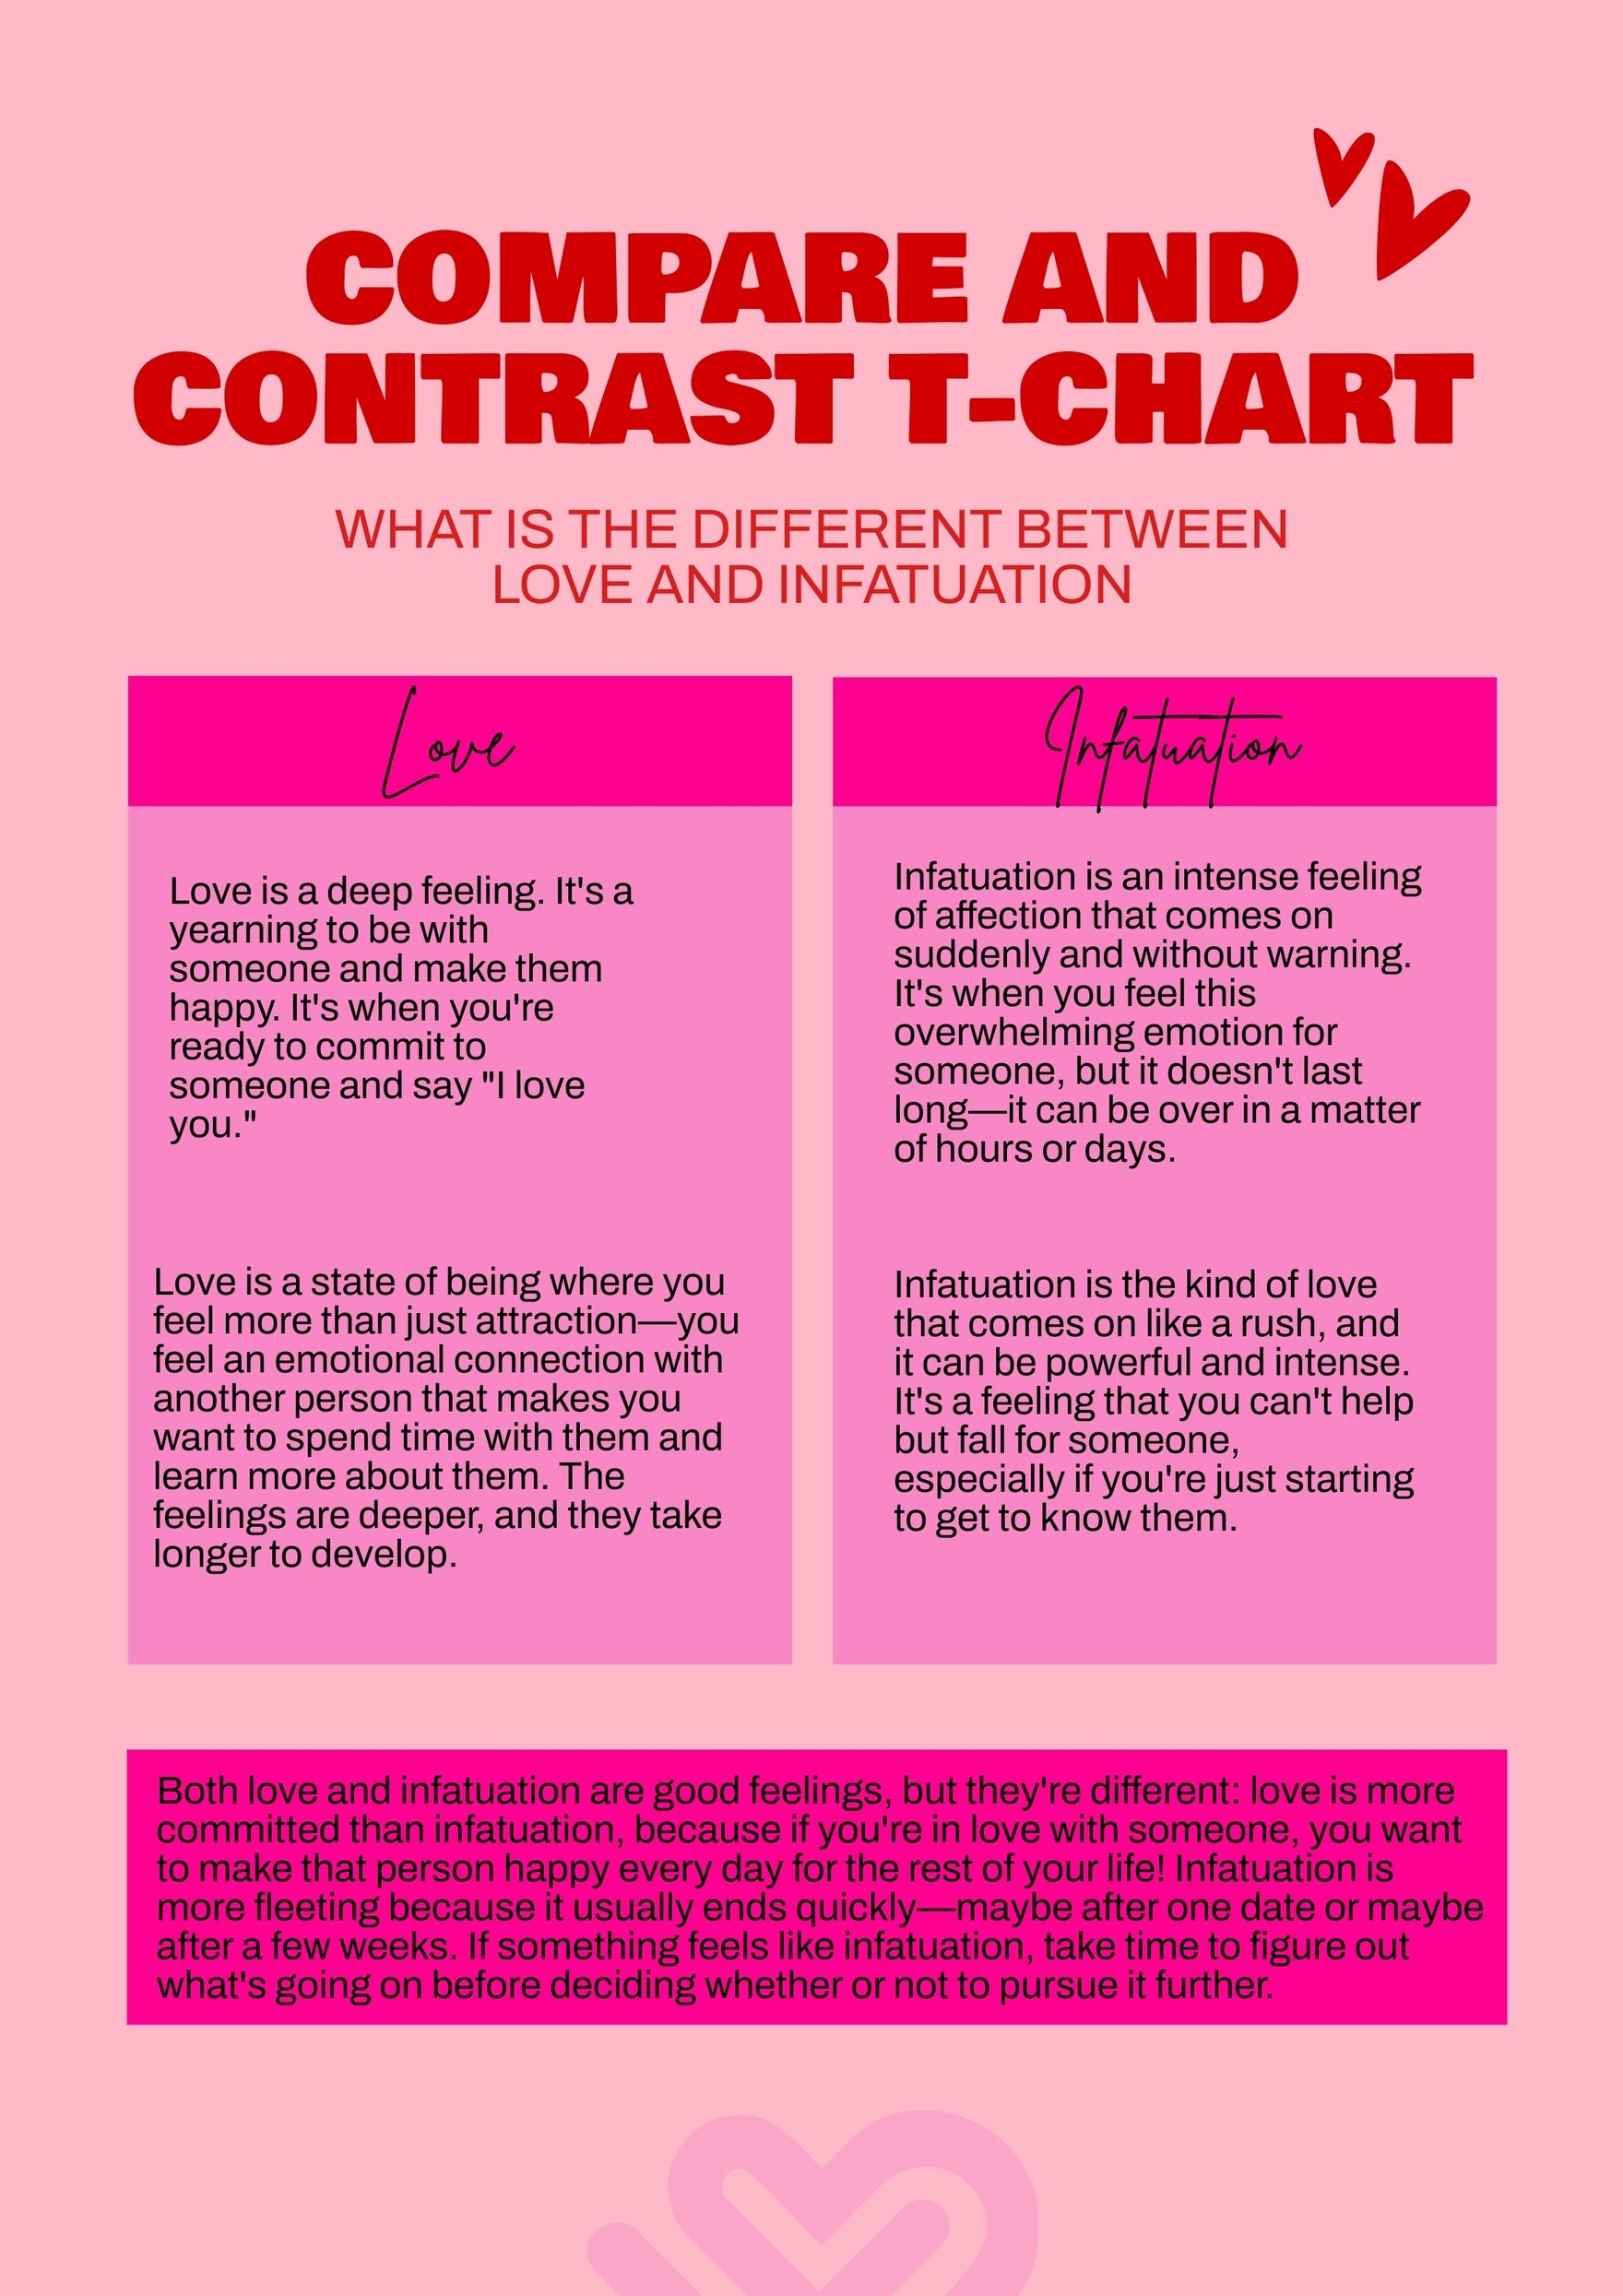 Compare and Contrast T-Chart in PDF, Illustrator